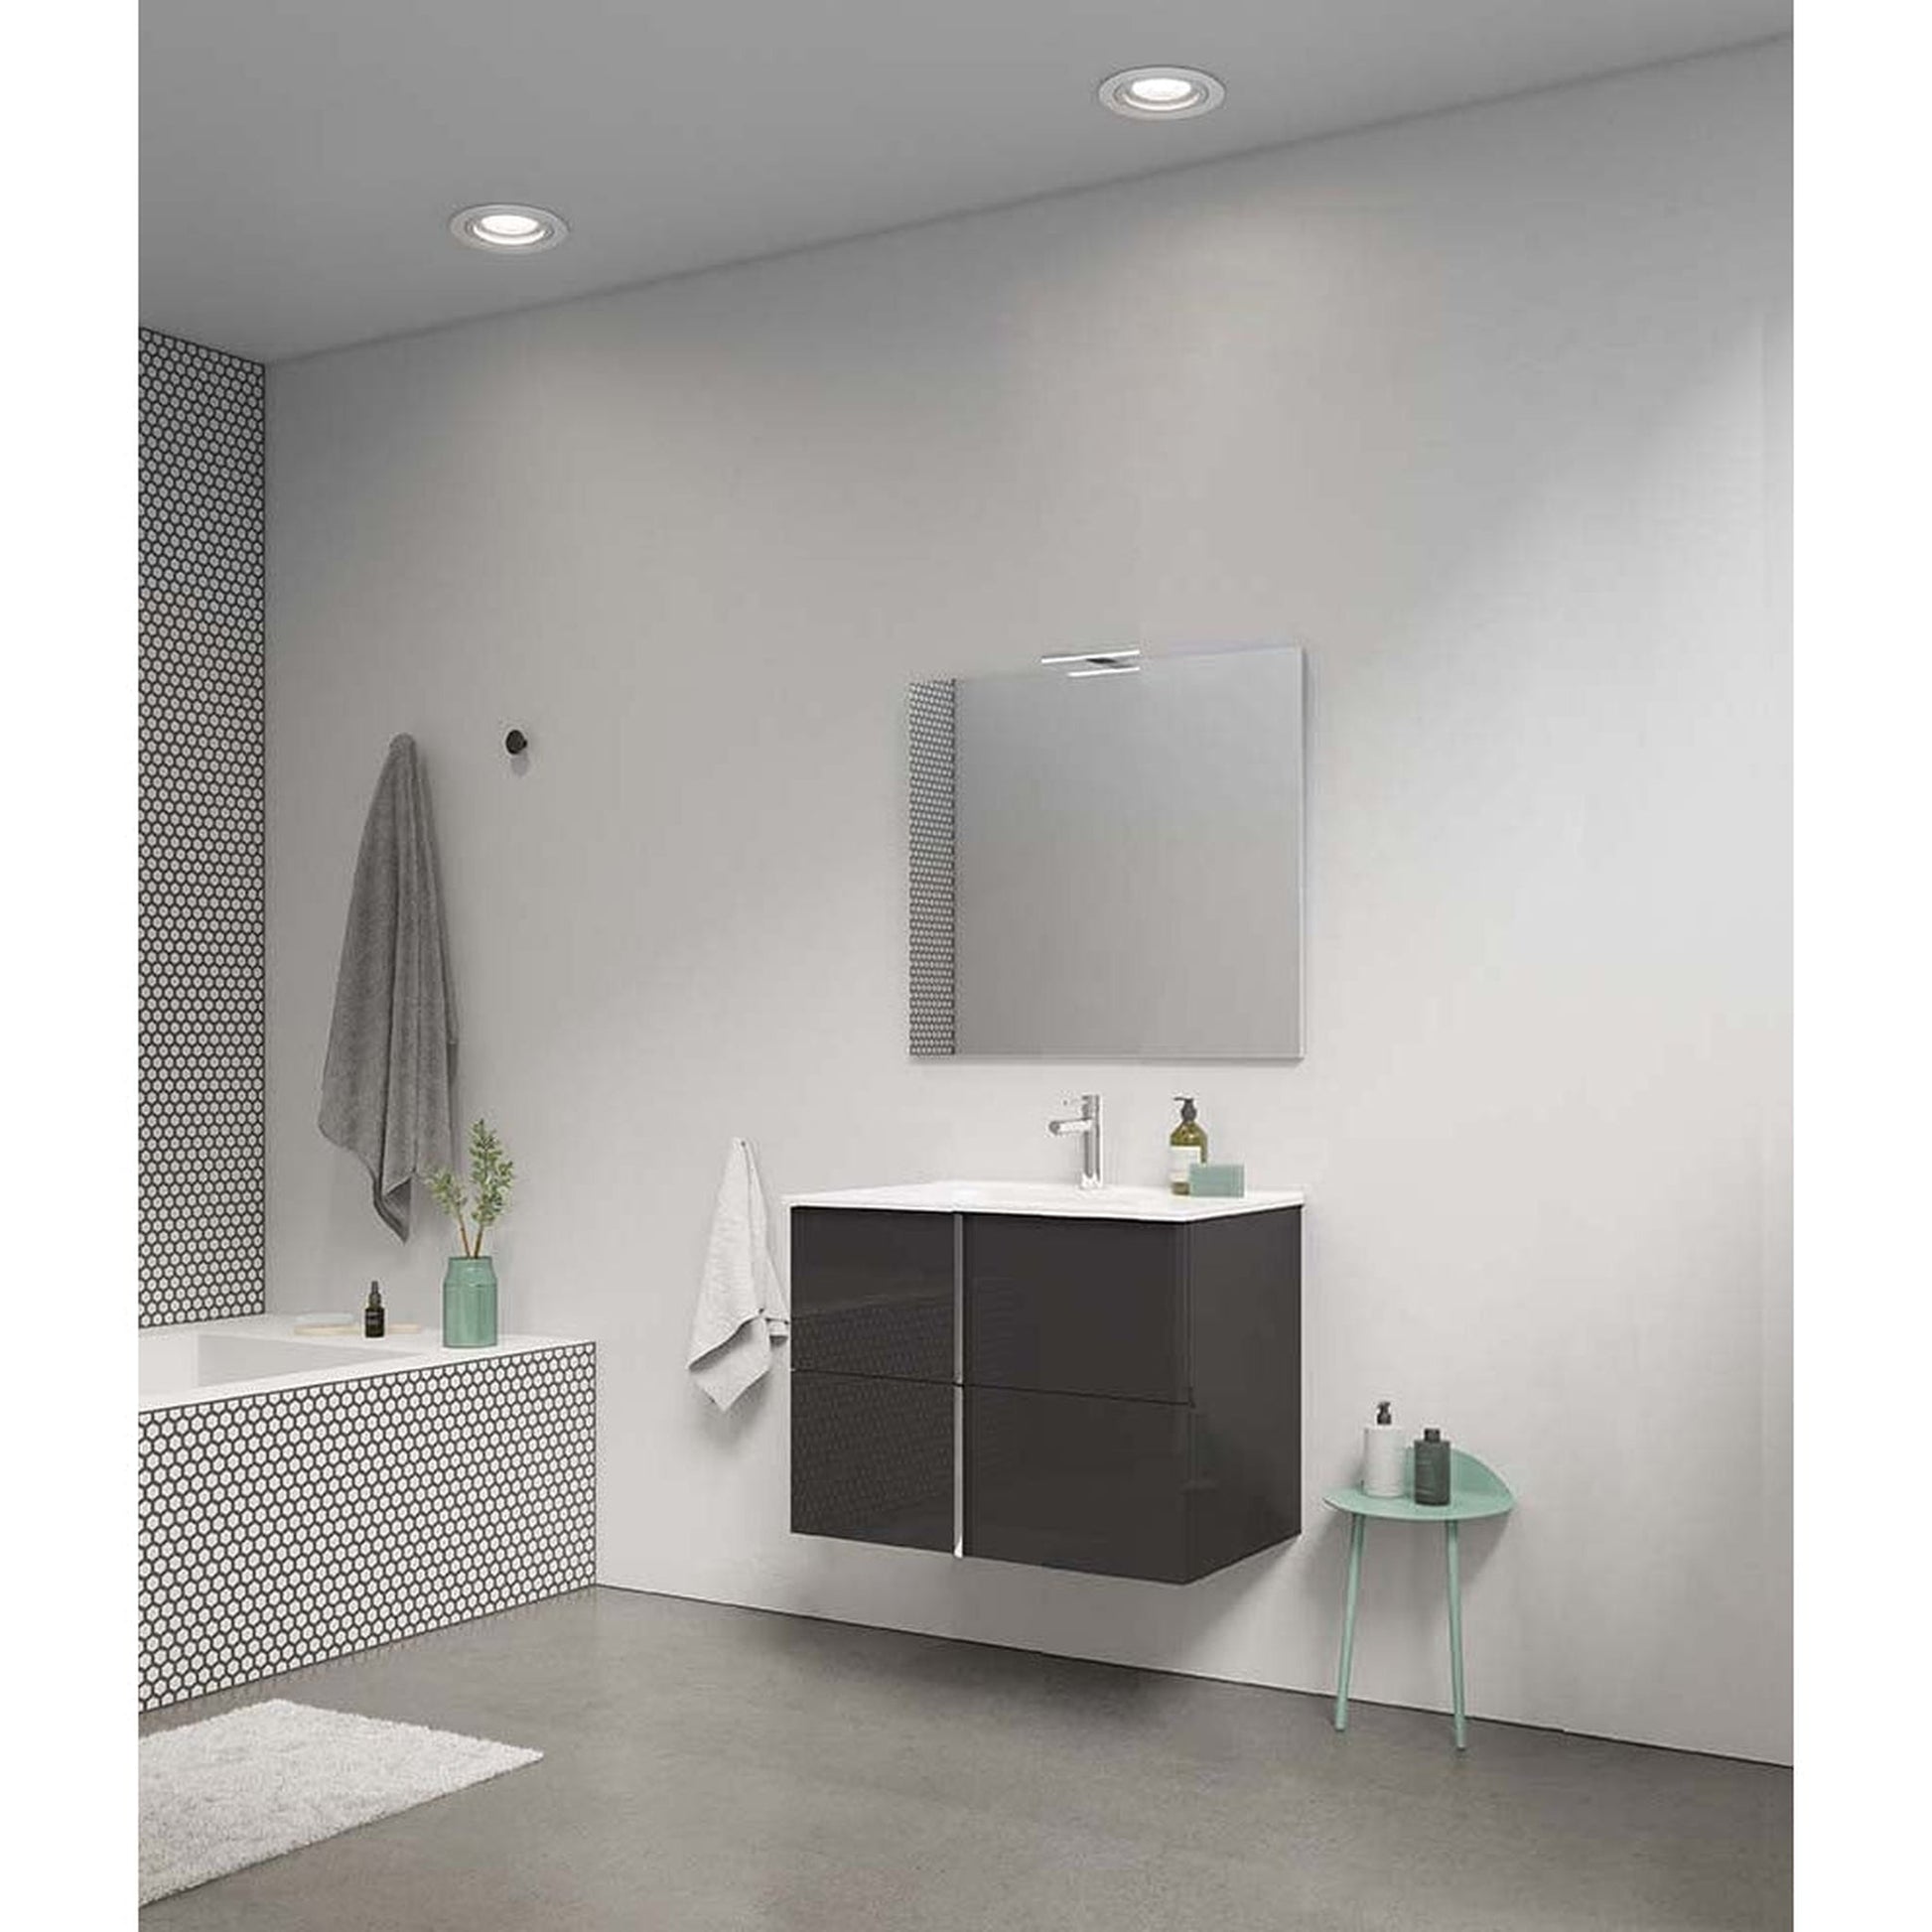 Royo Onix+ 24" x 18" Anthracite Modern Wall-mounted Vanity With 2 Drawers and Chrome Handle